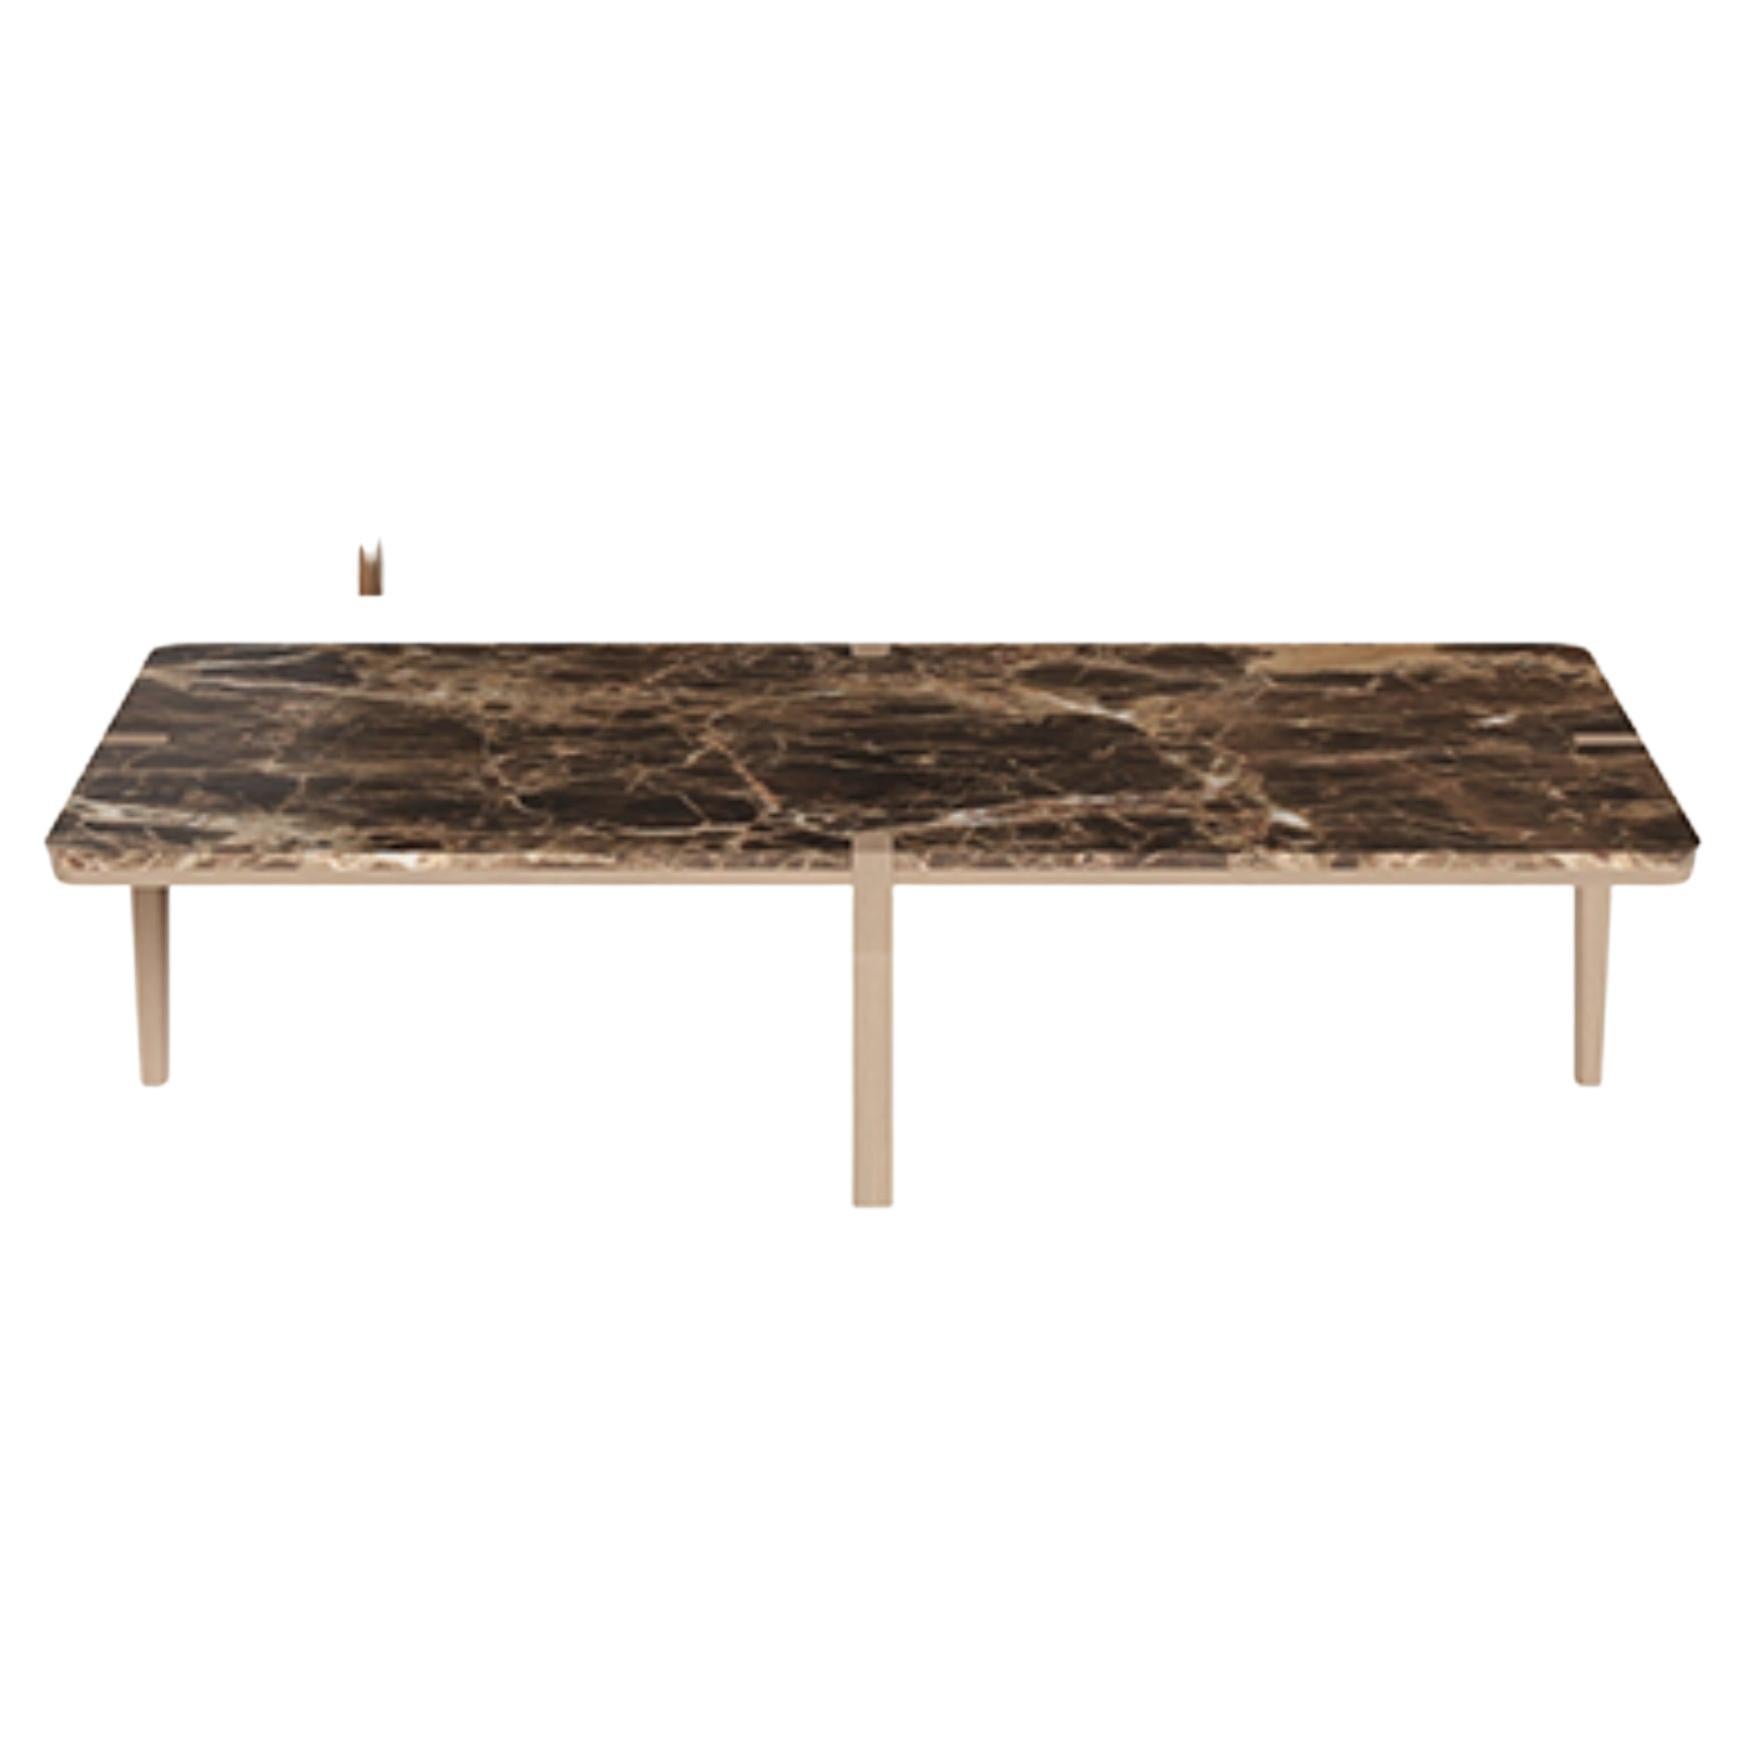 Rectangular Medium Size Brown Marble and Walnut Center Coffee Table